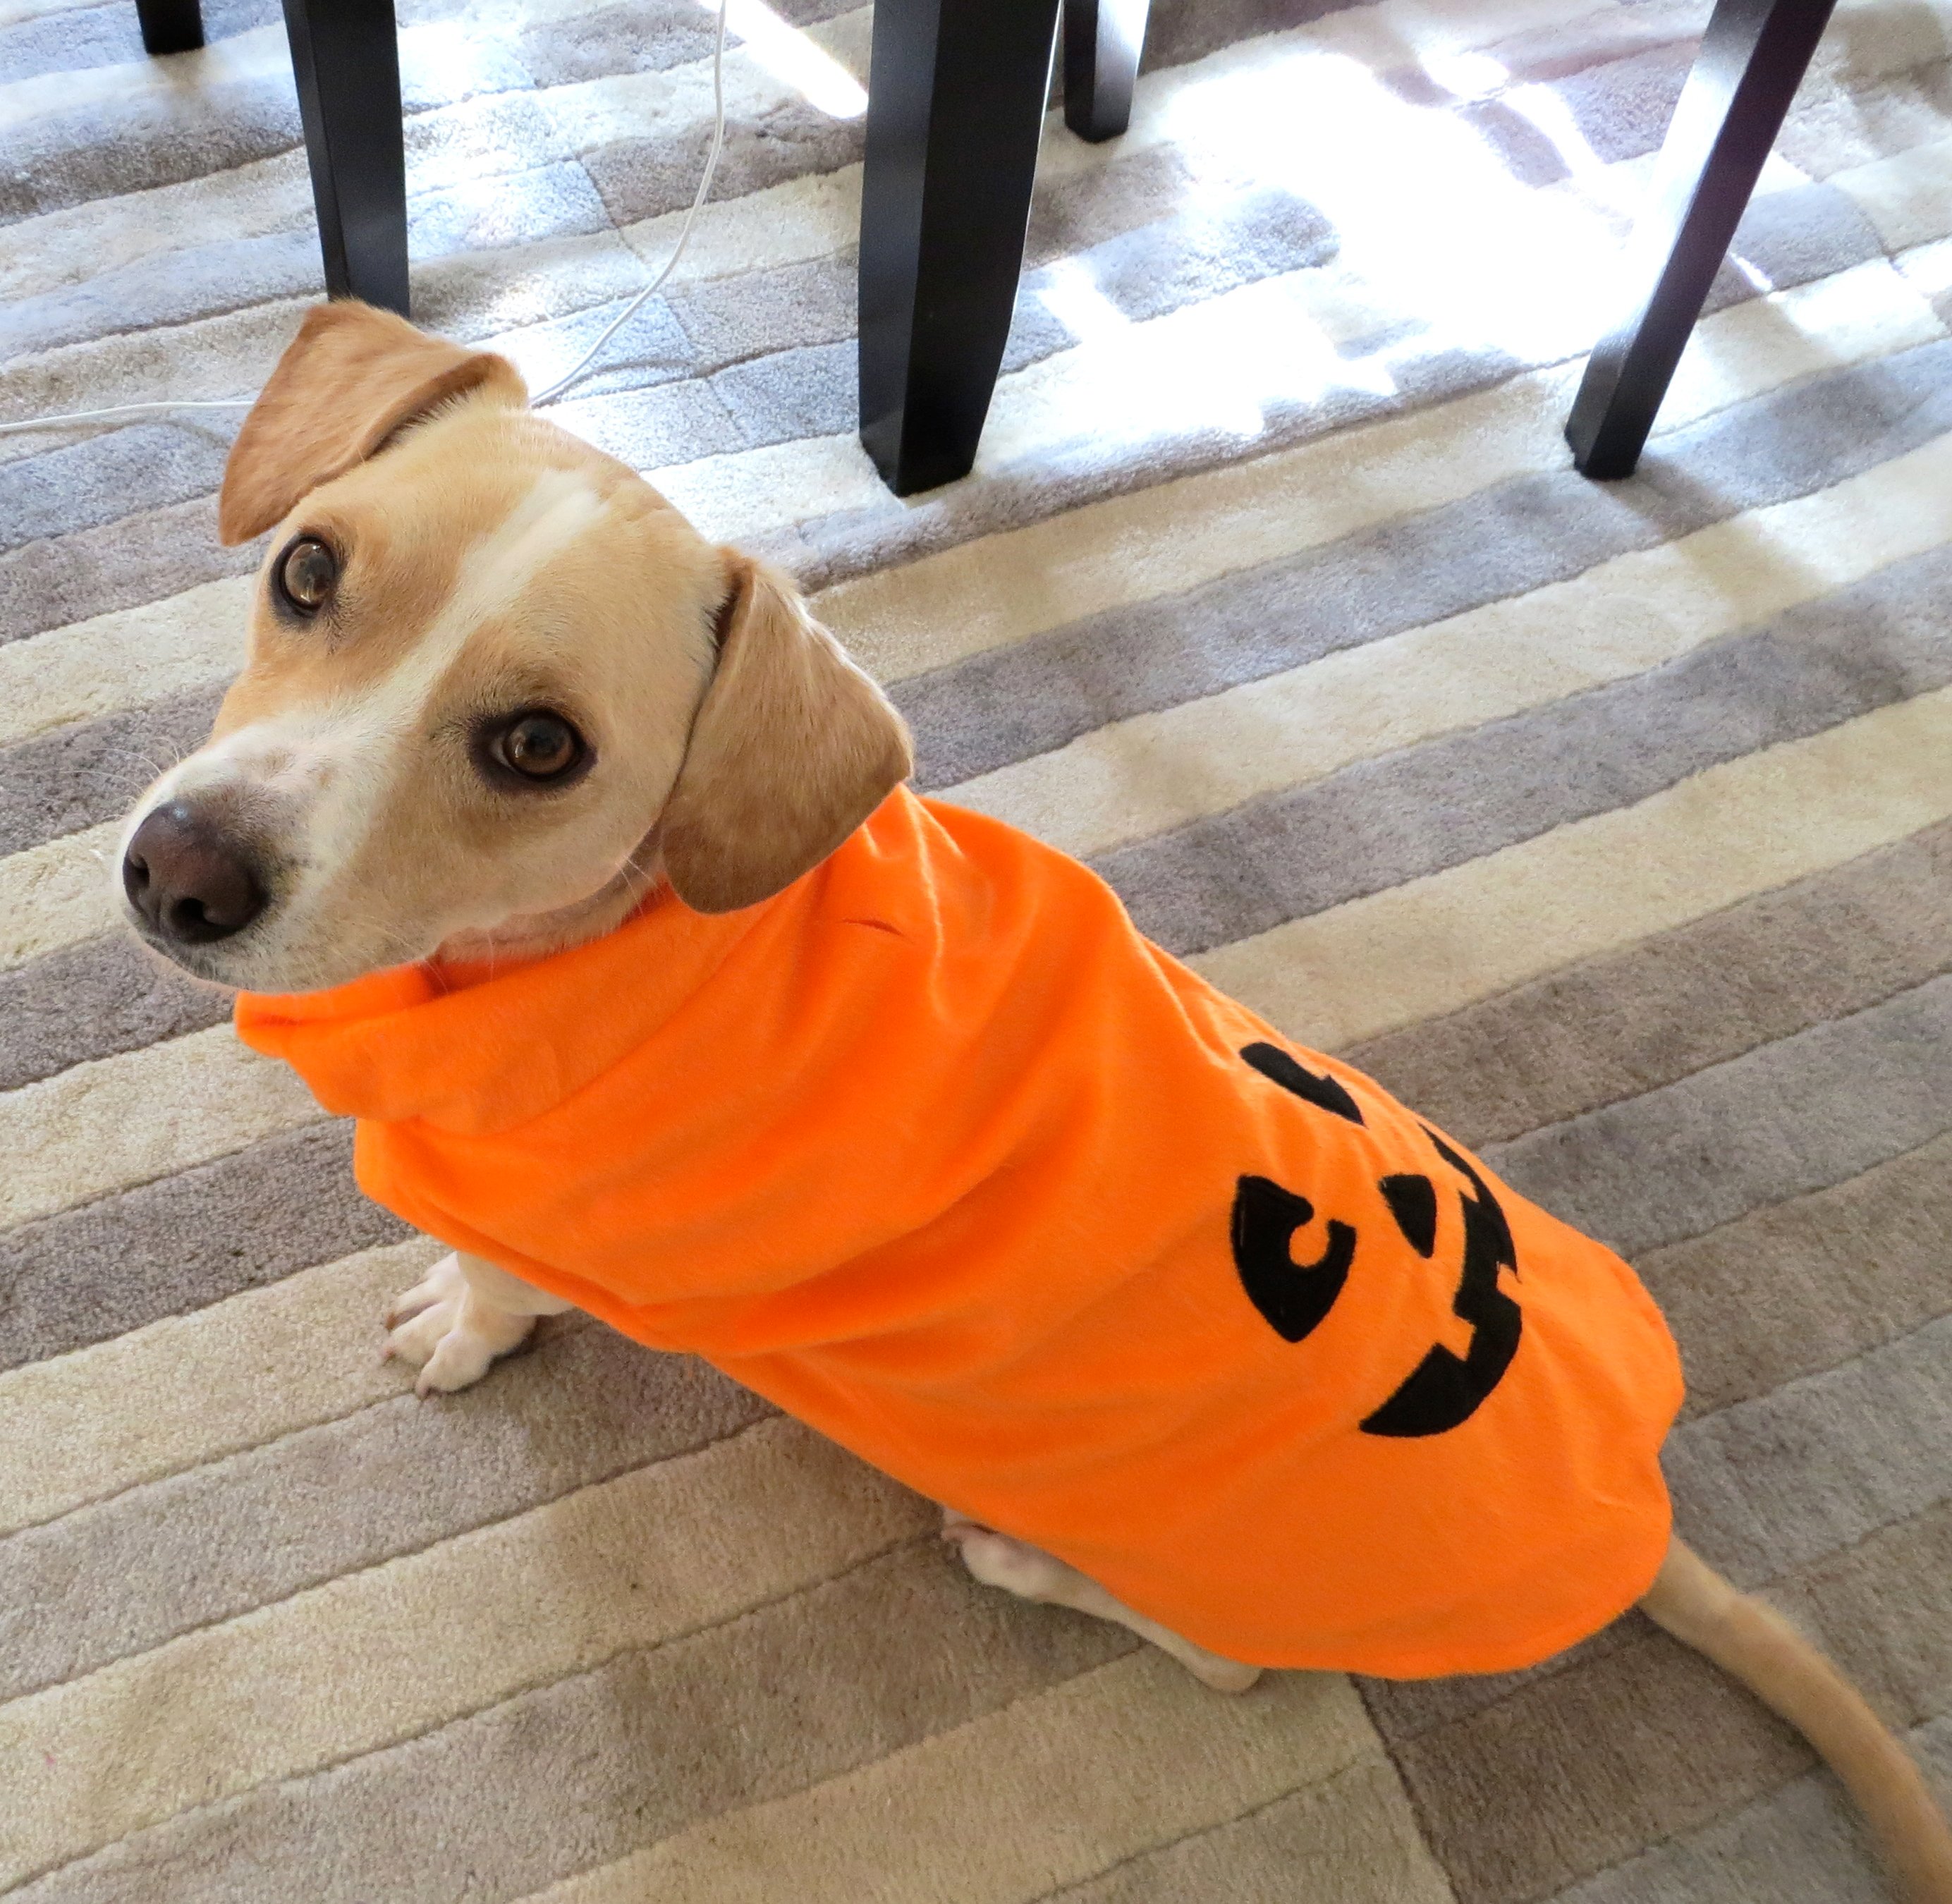 Most Popular Halloween Costumes For Dogs - 3 Most Important Halloween Safety Tips for Dogs